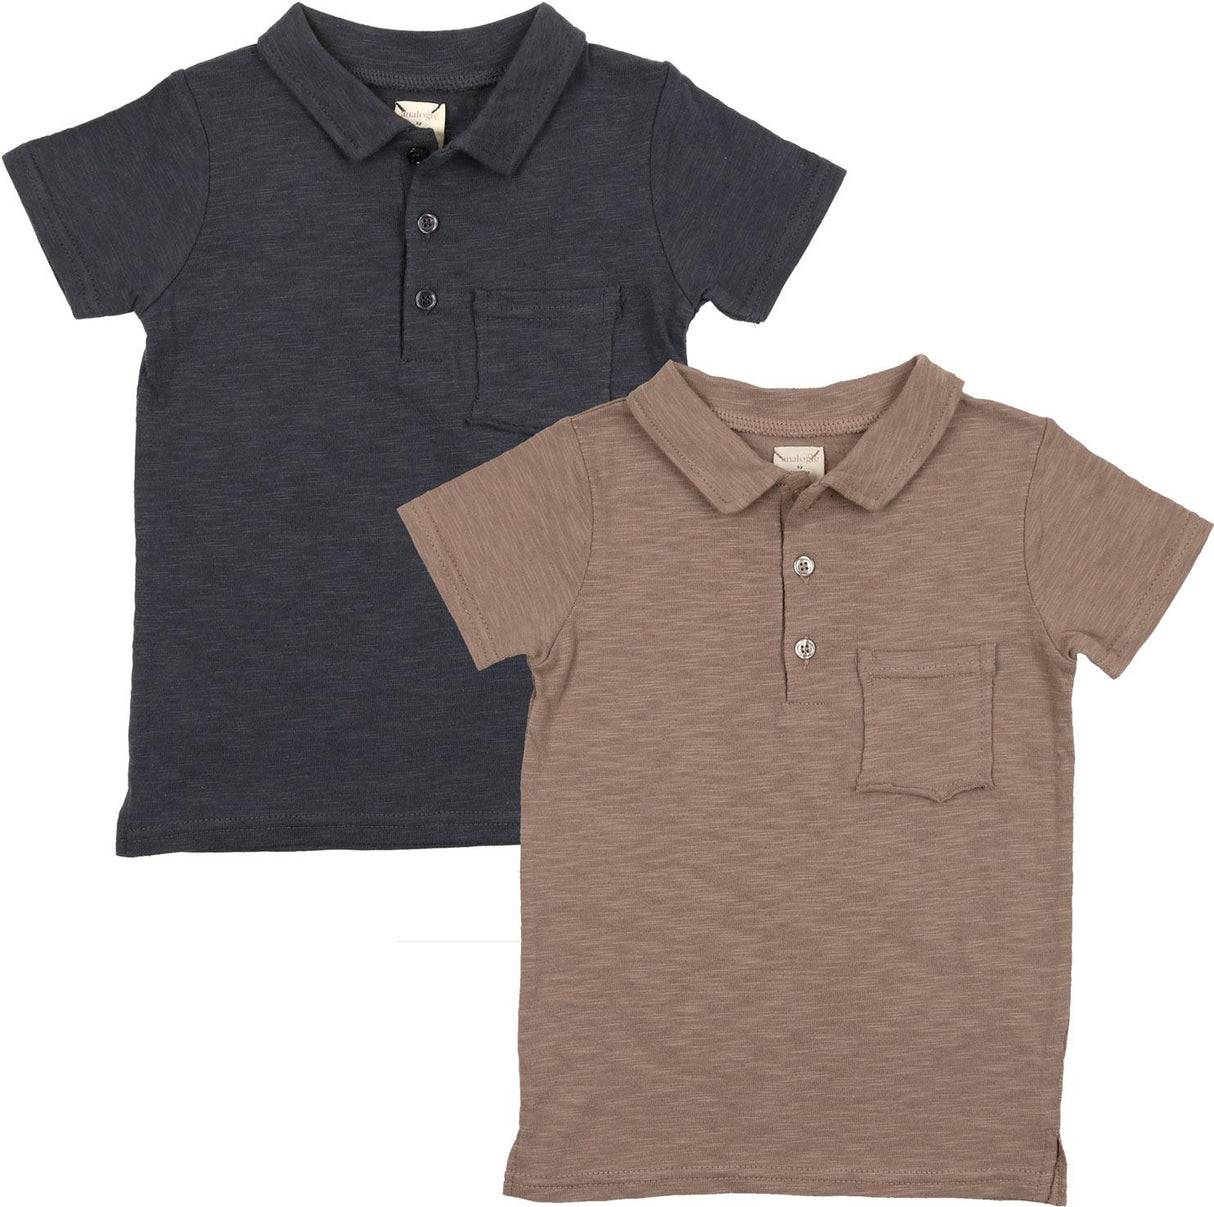 Analogie by Lil Legs Terry Collection Boys Short Sleeve Textured Rolled Edge Polo Shirt